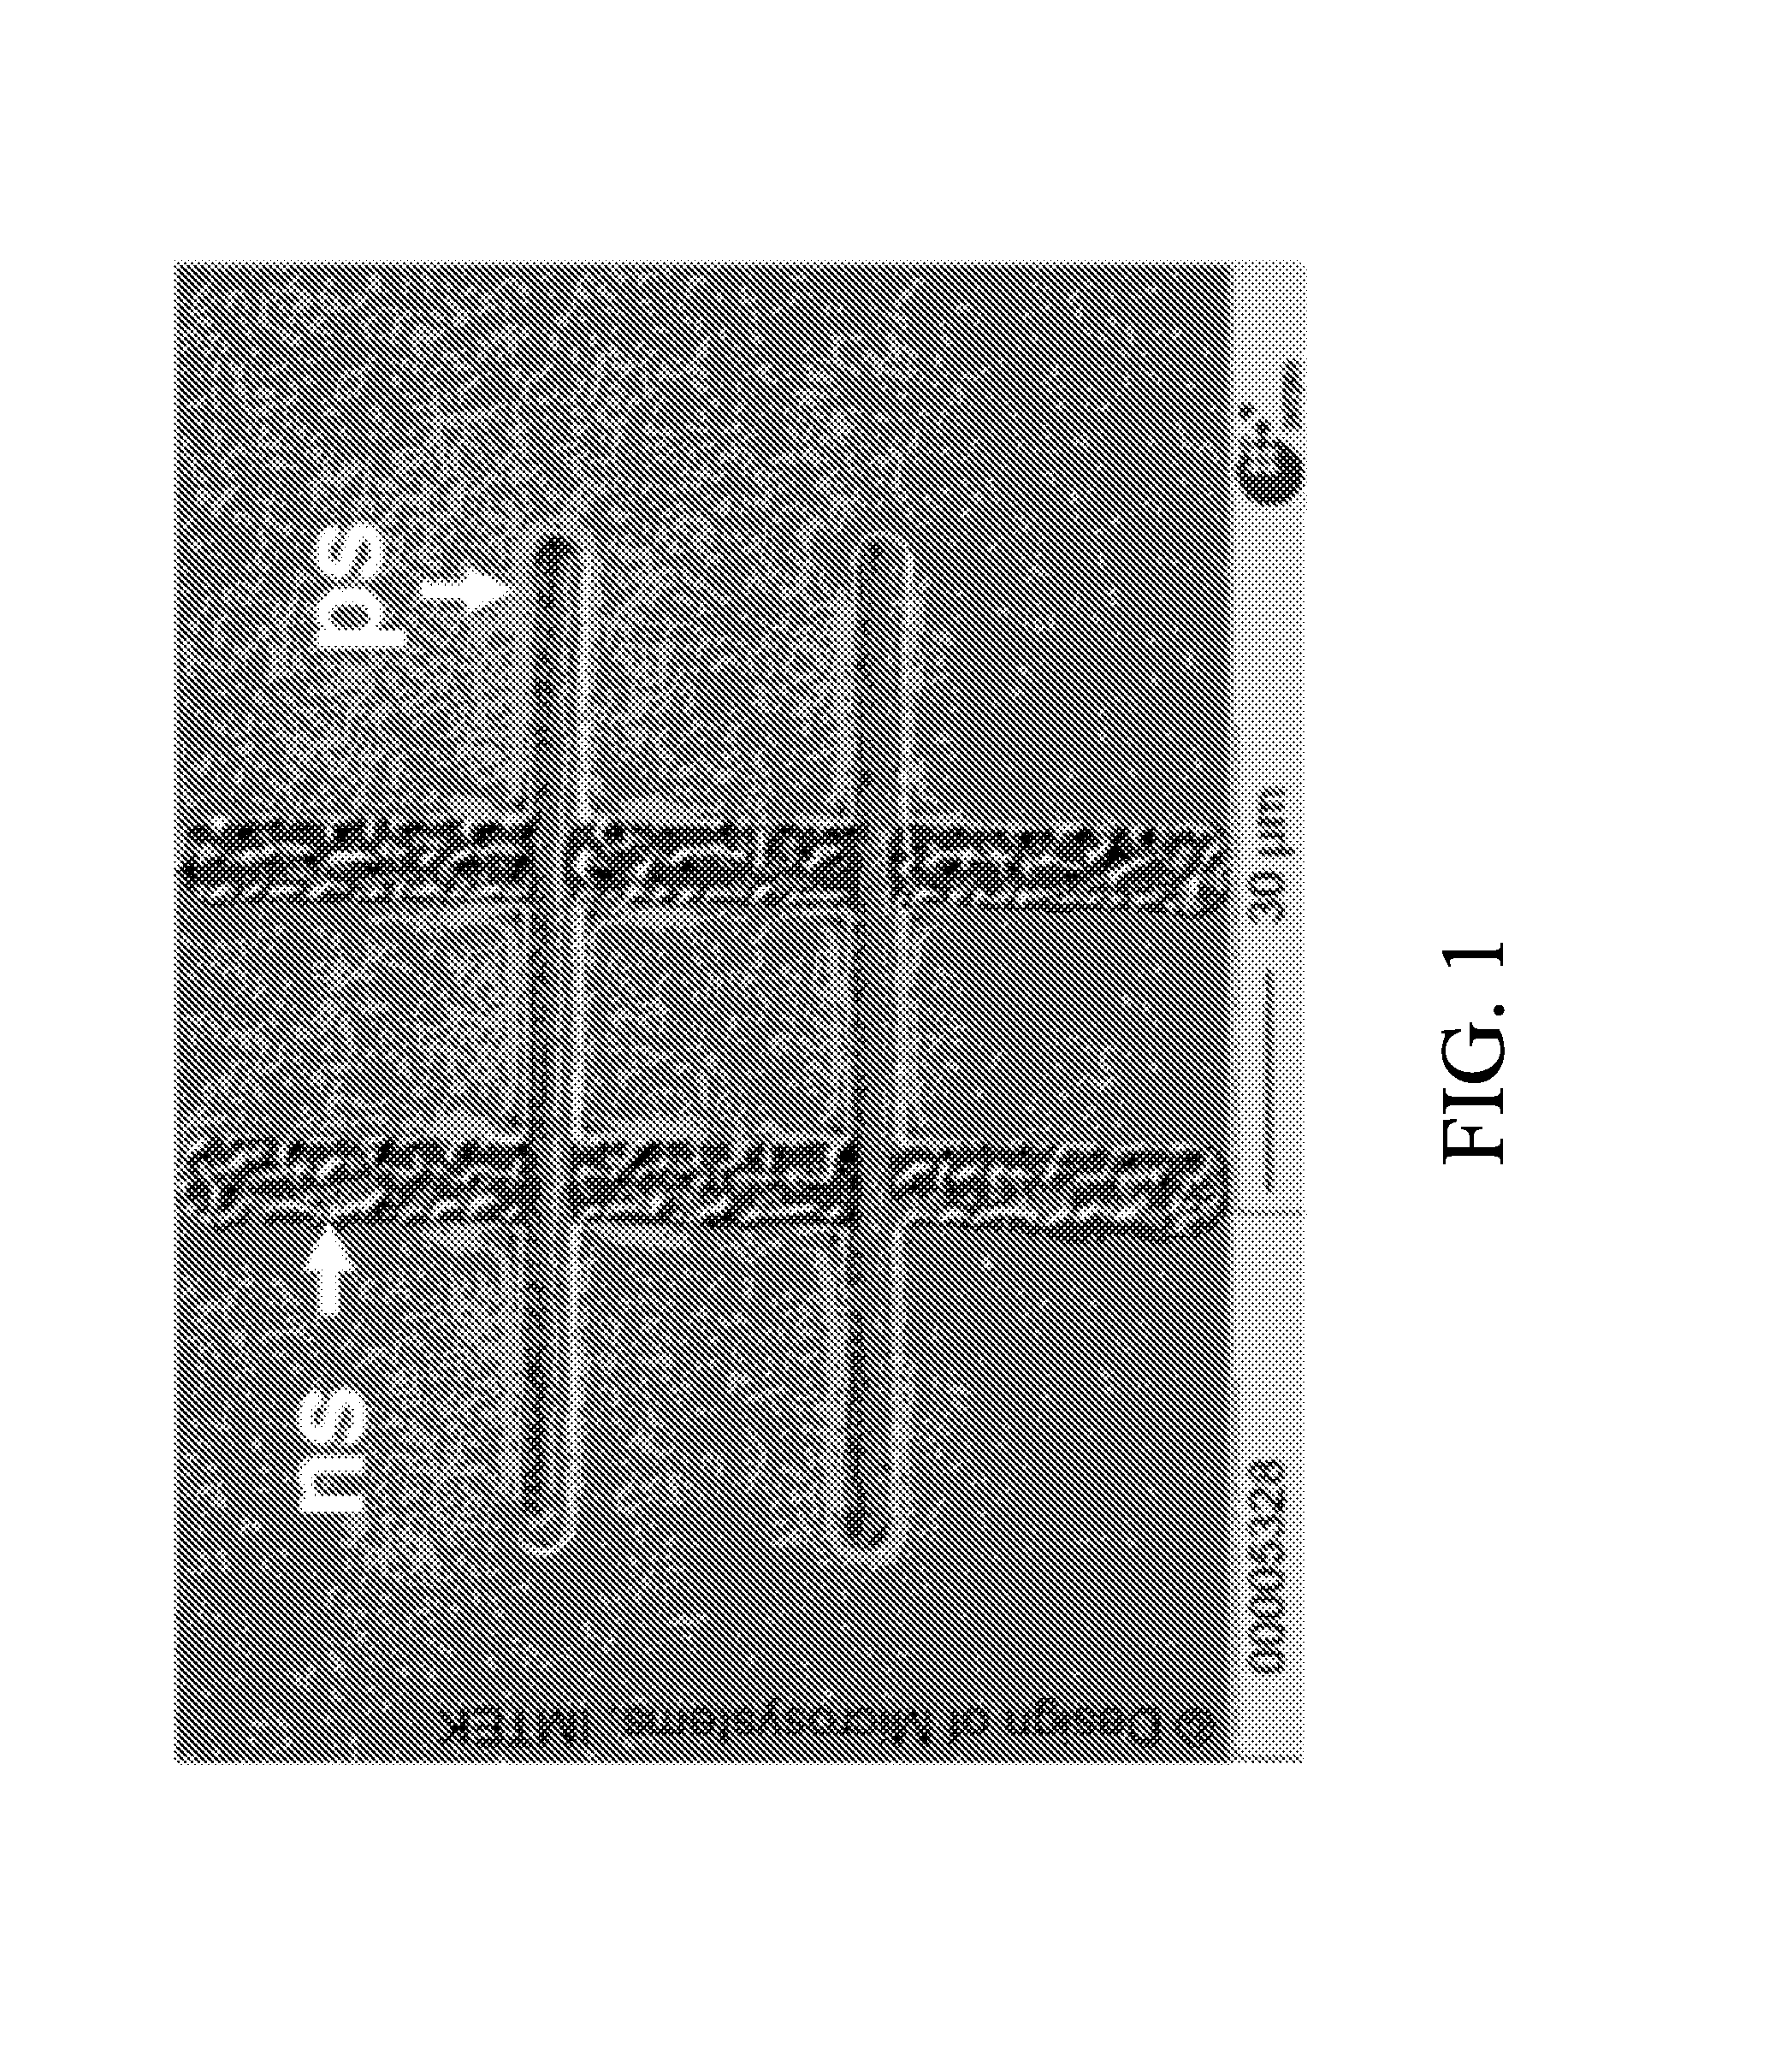 Apparatus for generating short-pulse laser using temporally modulated sideband gain